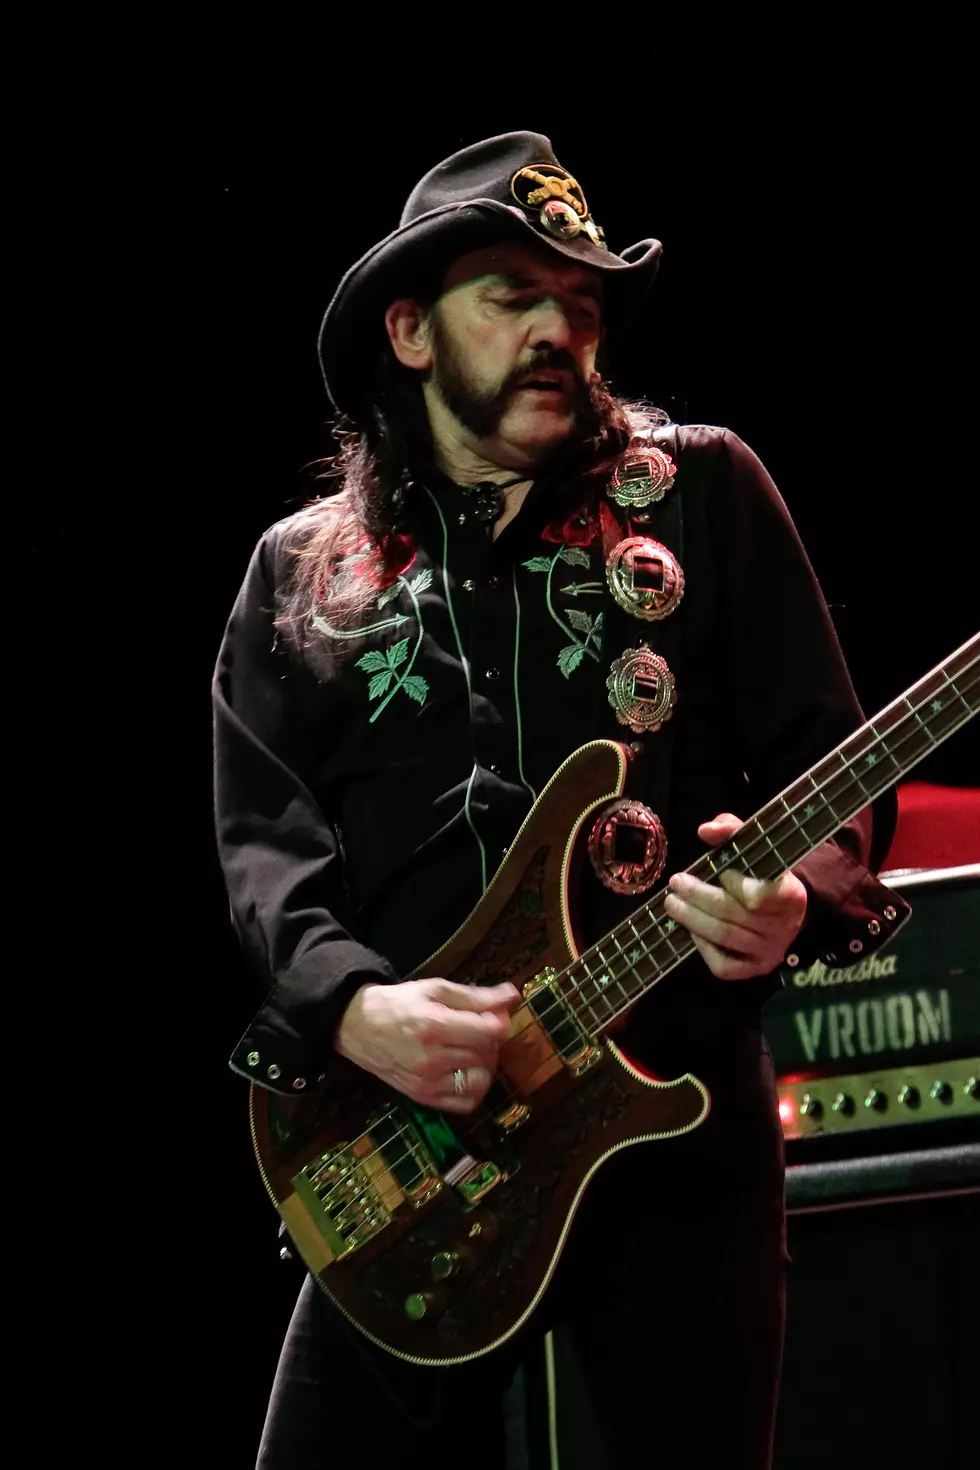 “Lemmy” Documentary Coming In February